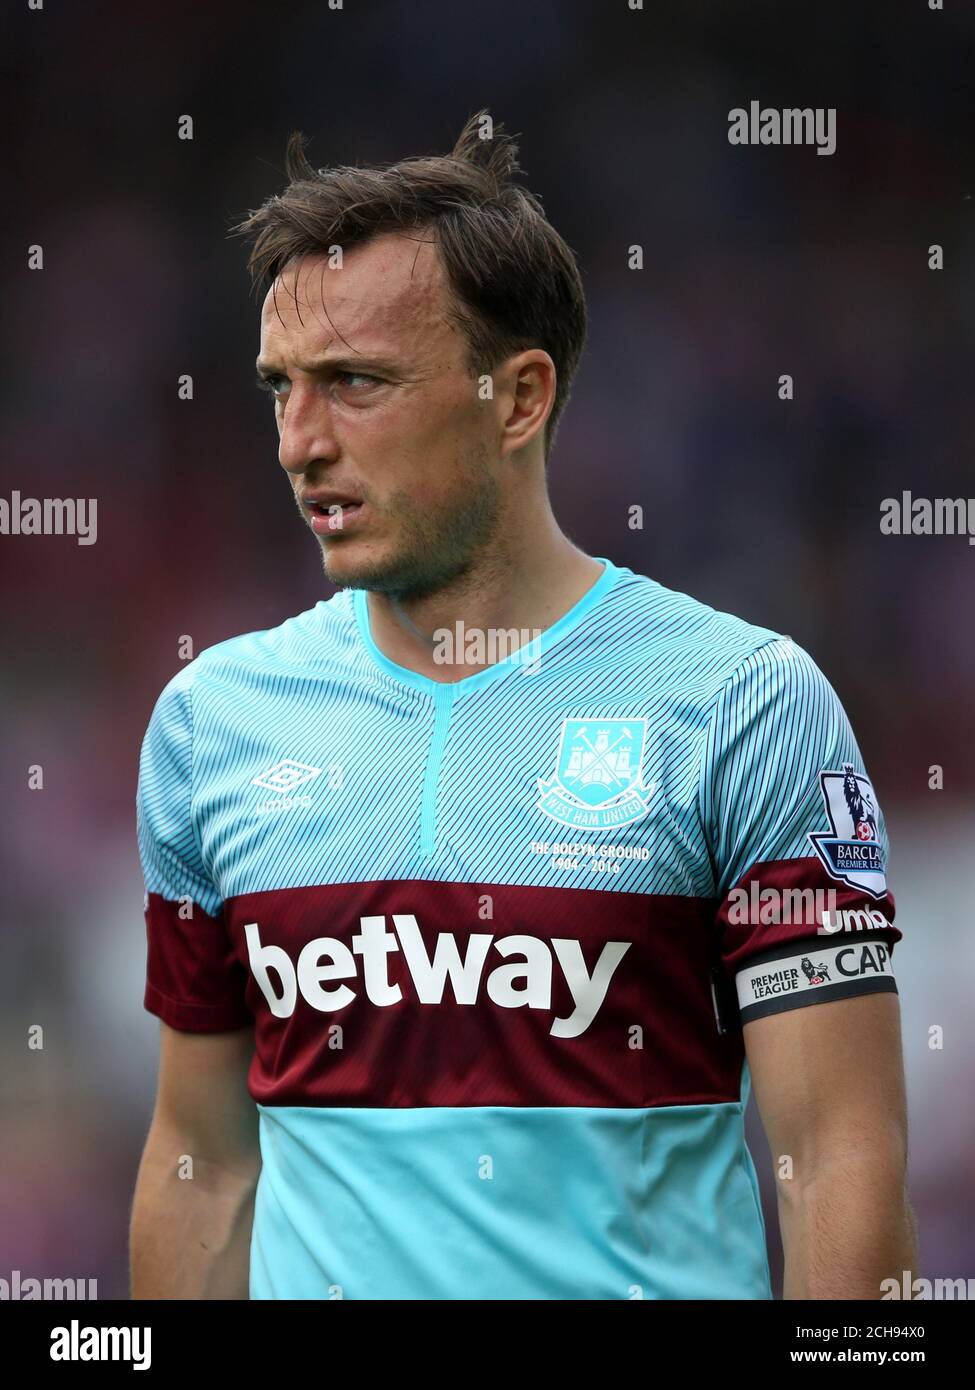 West Ham United's Mark Noble during the Barclays Premier League match at the Britannia Stadium, Stoke-on-Trent. PRESS ASSOCIATION Photo. Picture date: Sunday May 15, 2016. See PA story SOCCER Stoke. Photo credit should read: Tim Goode/PA Wire. RESTRICTIONS: No use with unauthorised audio, video, data, fixture lists, club/league logos or 'live' services. Online in-match use limited to 75 images, no video emulation. No use in betting, games or single club/league/player publications. Stock Photo